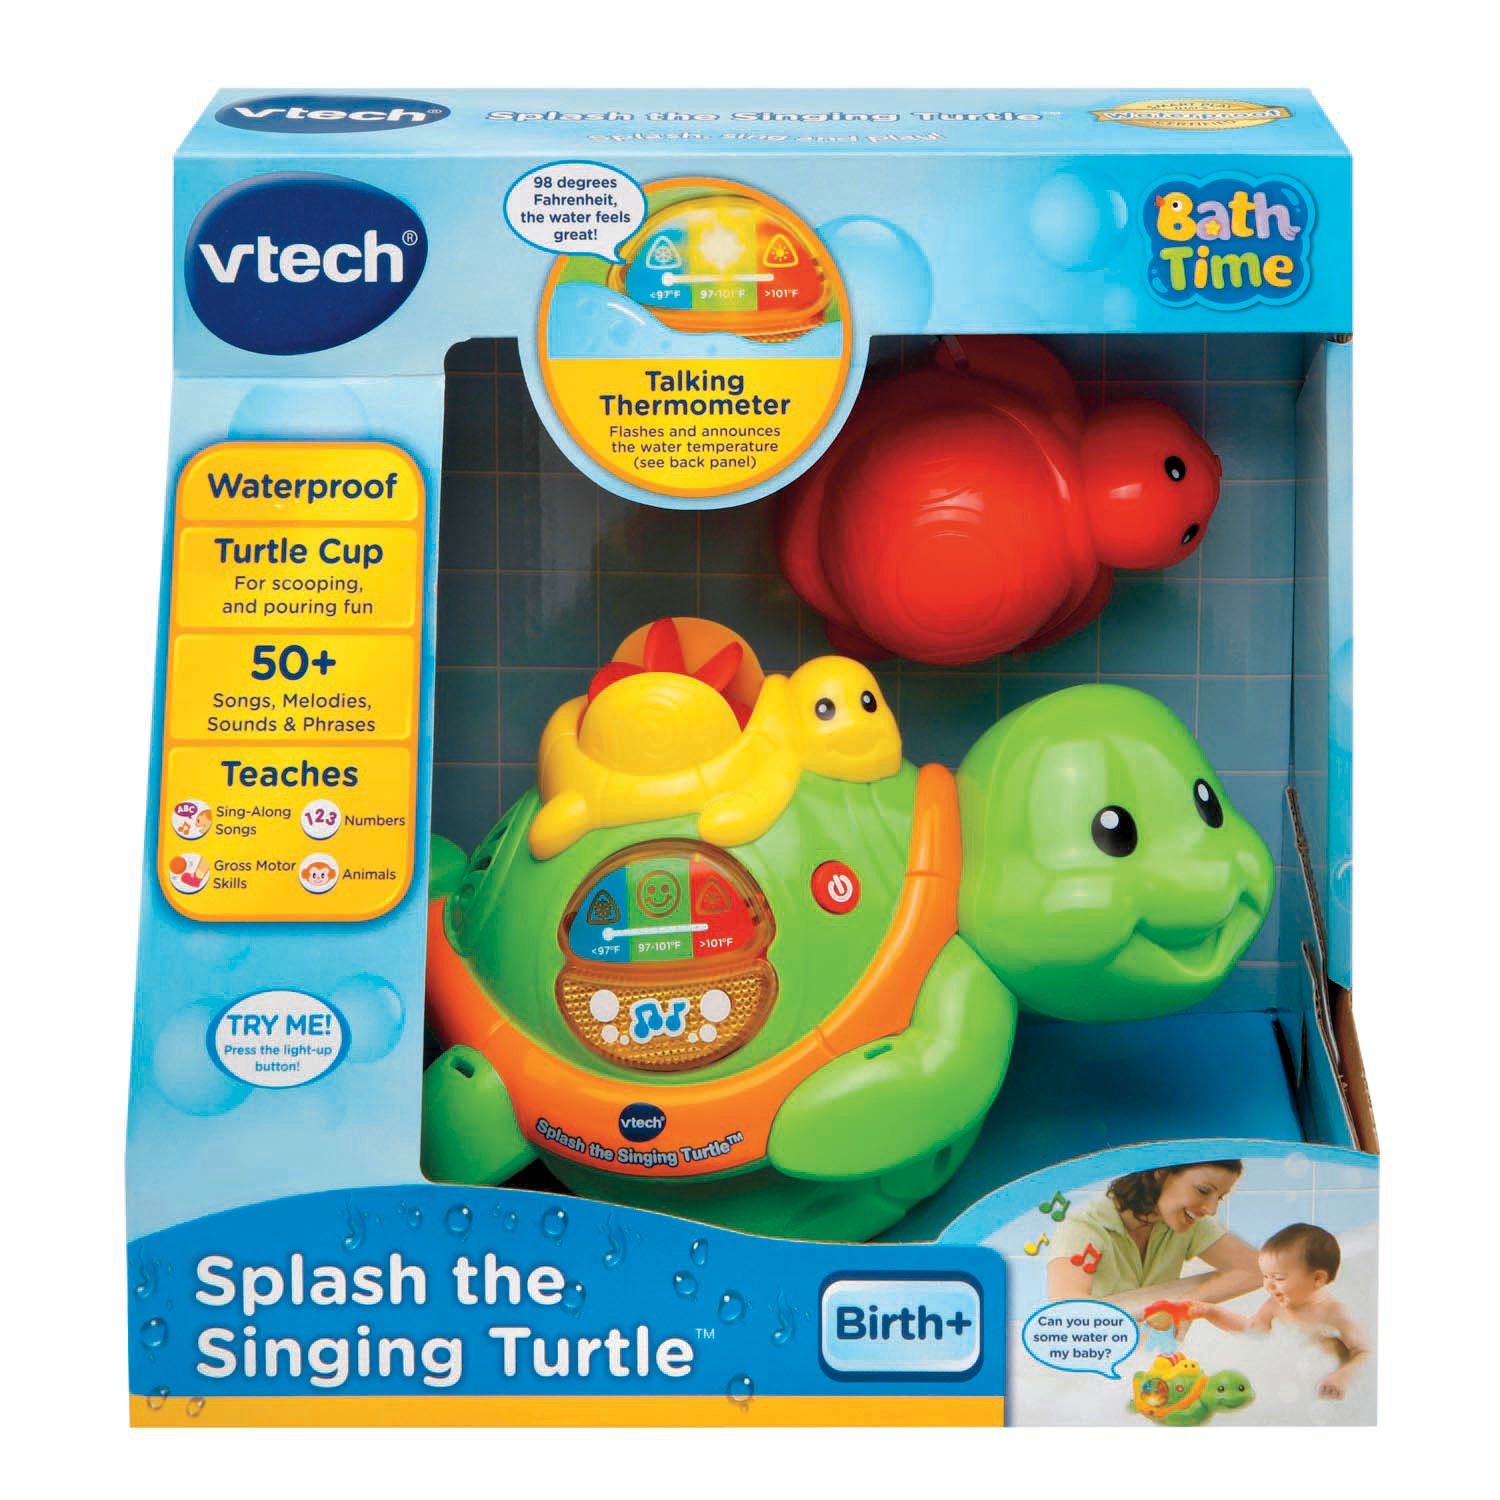 vtech baby turtle